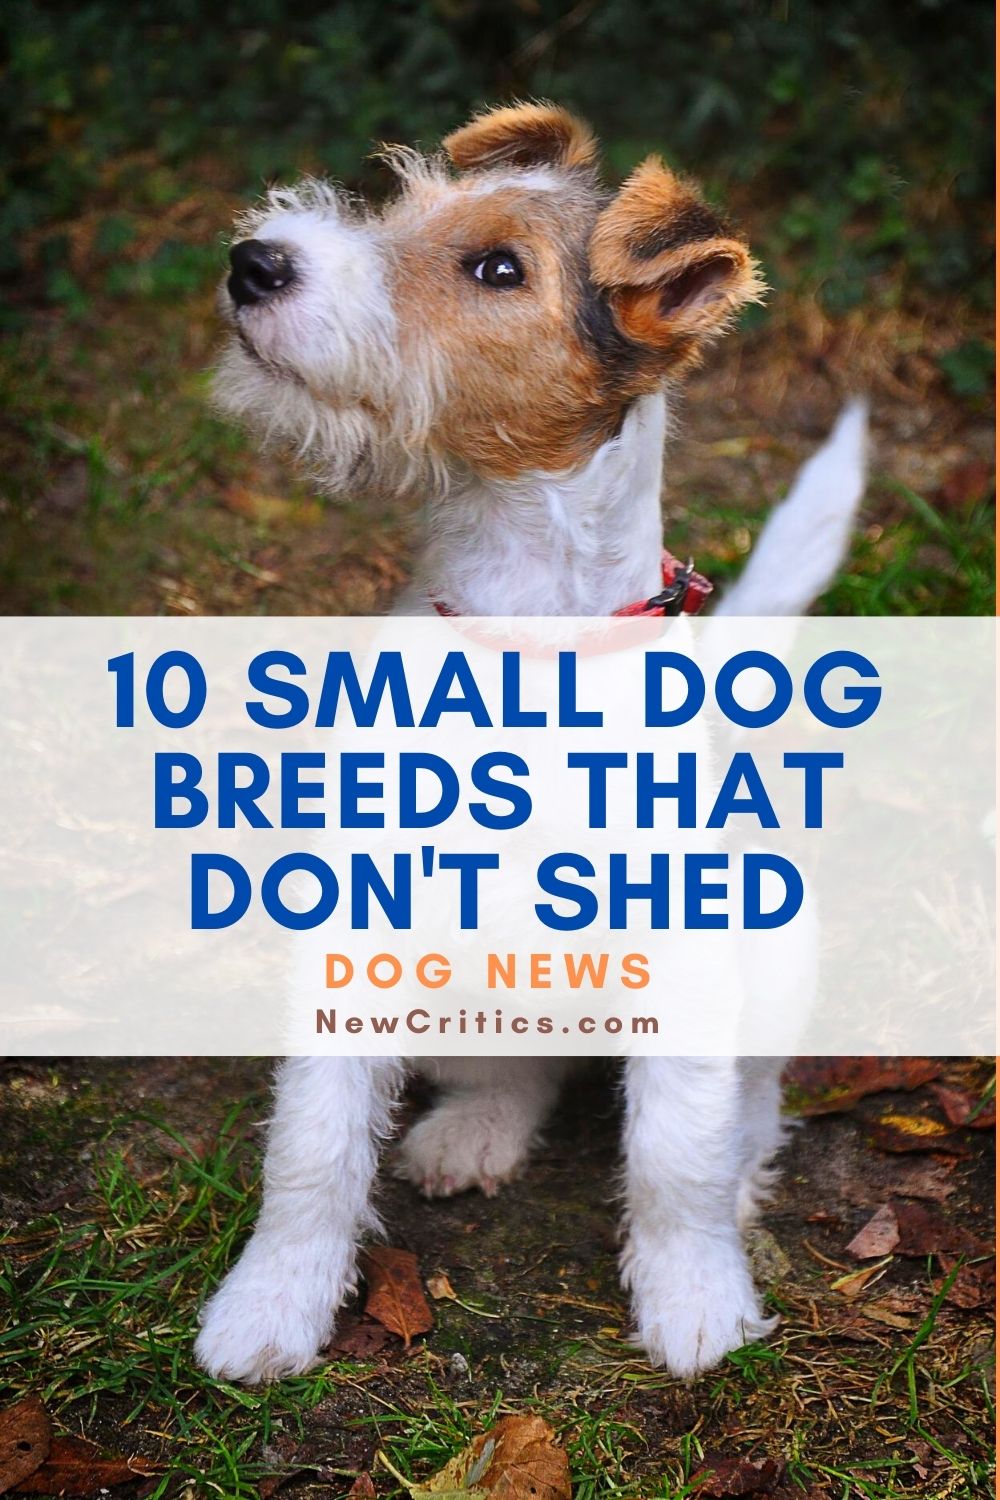 10 Small Dog Breeds That Don't Shed